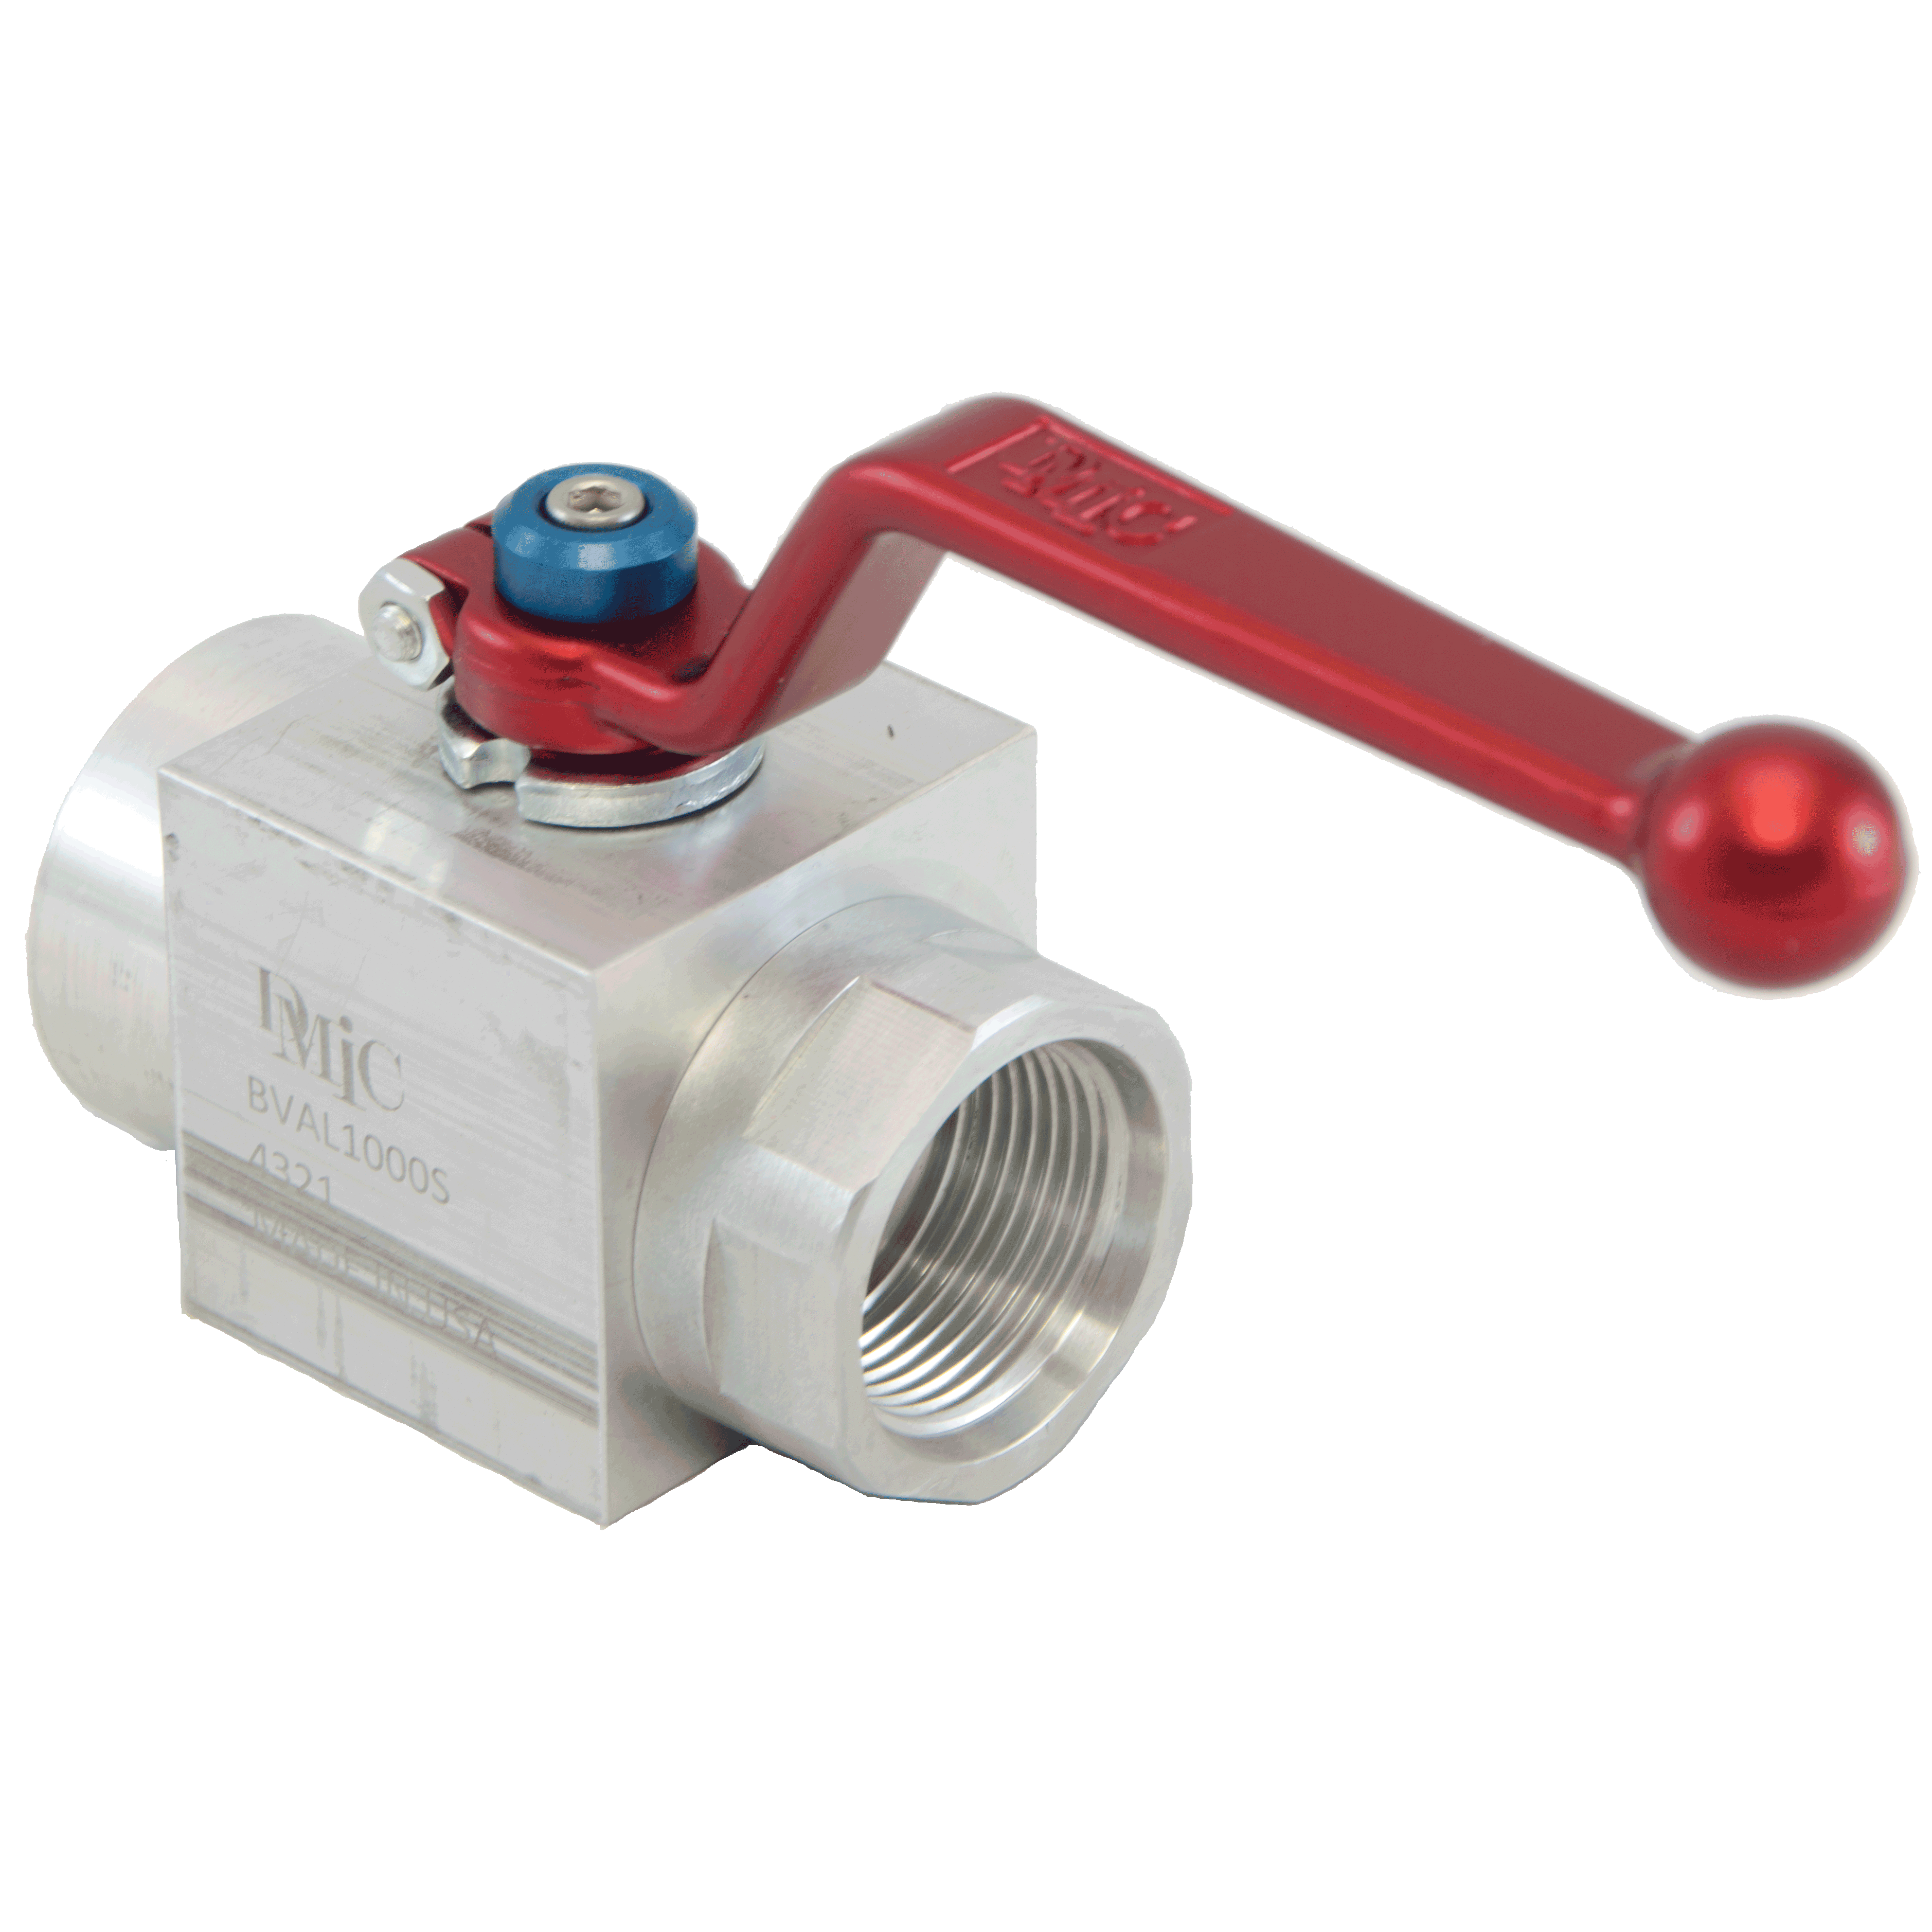 BVAL-1250S-4321-AZZN : DMIC Suction Ball Valve, #20 SAE (3/8), Aluminum, 600psi, Two-Way, with Locking Handle